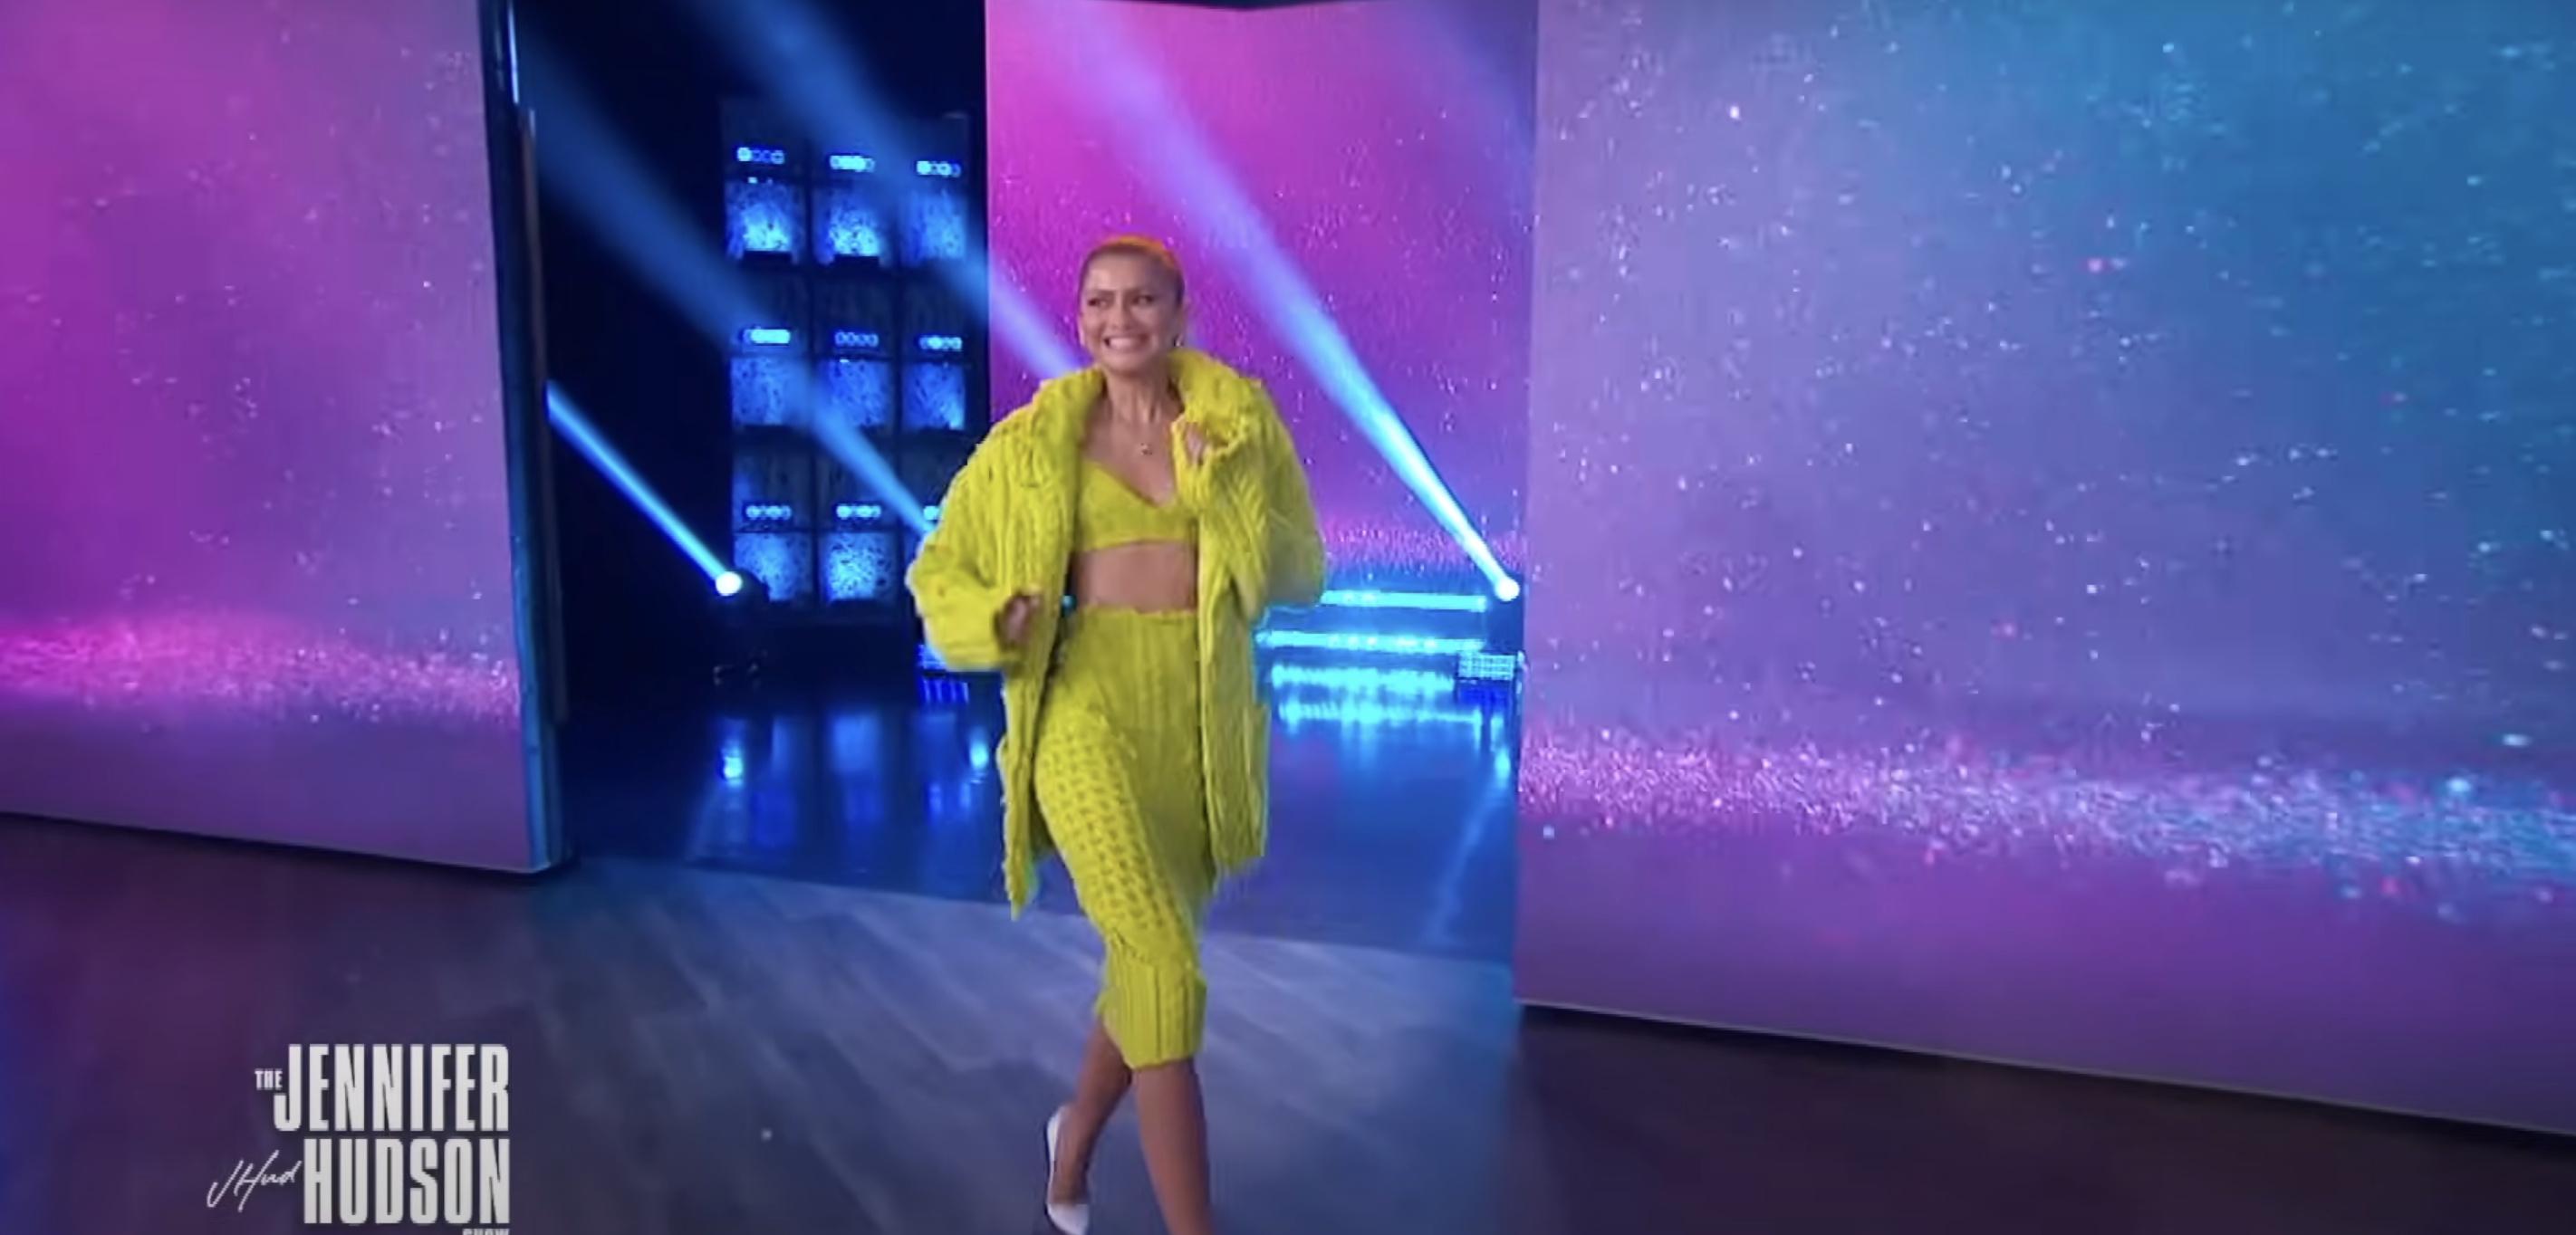 Person in a textured yellow outfit with a crop top and pants, standing on a stage with lit-up background